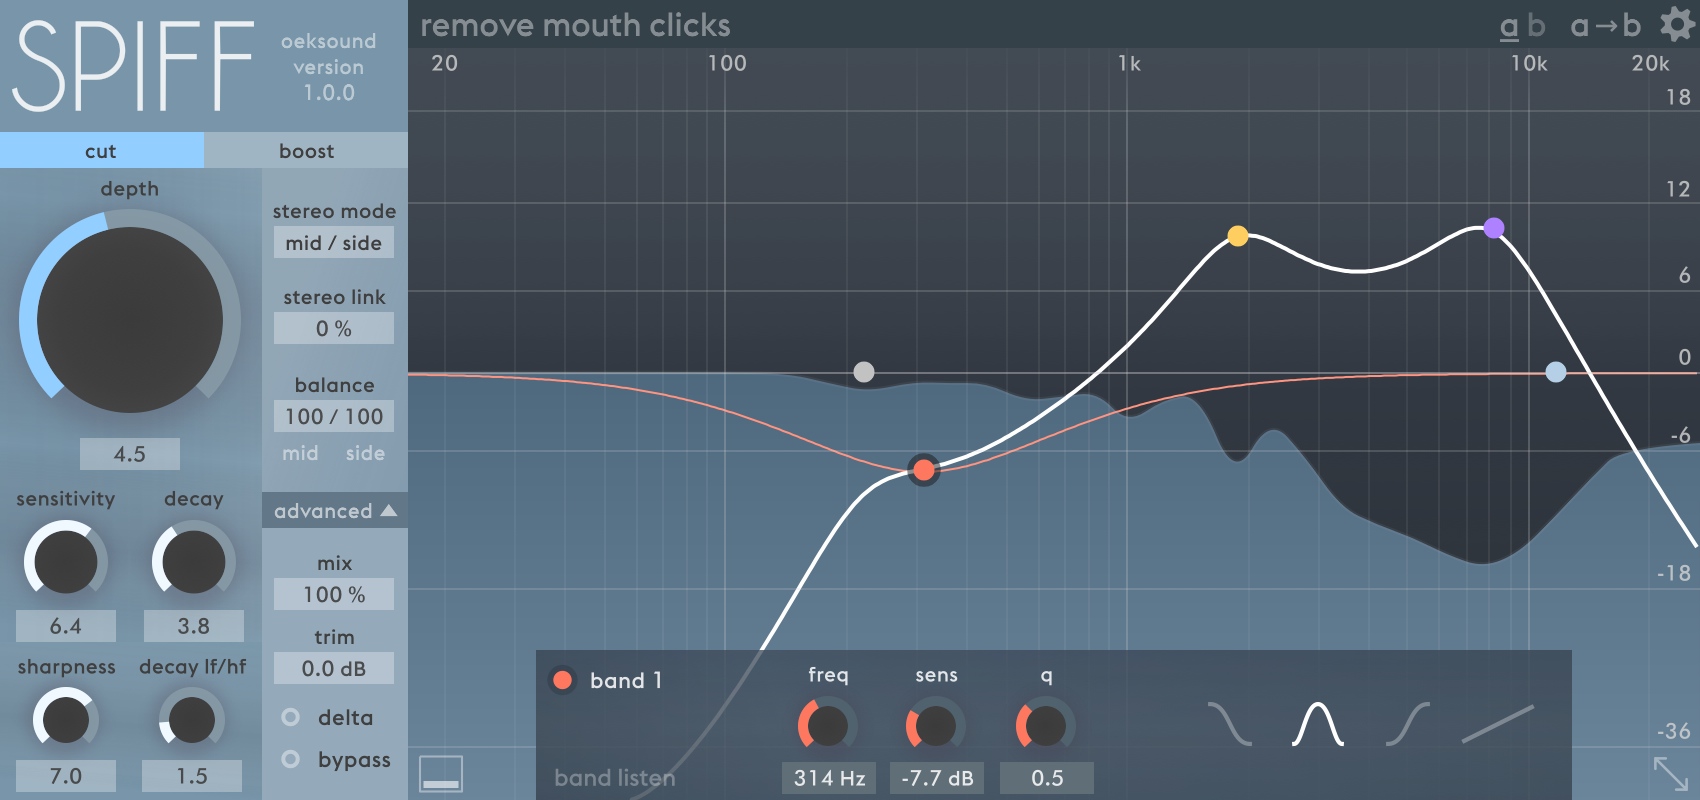 New Software Review: spiff Adaptive Transient Processor by oeksound